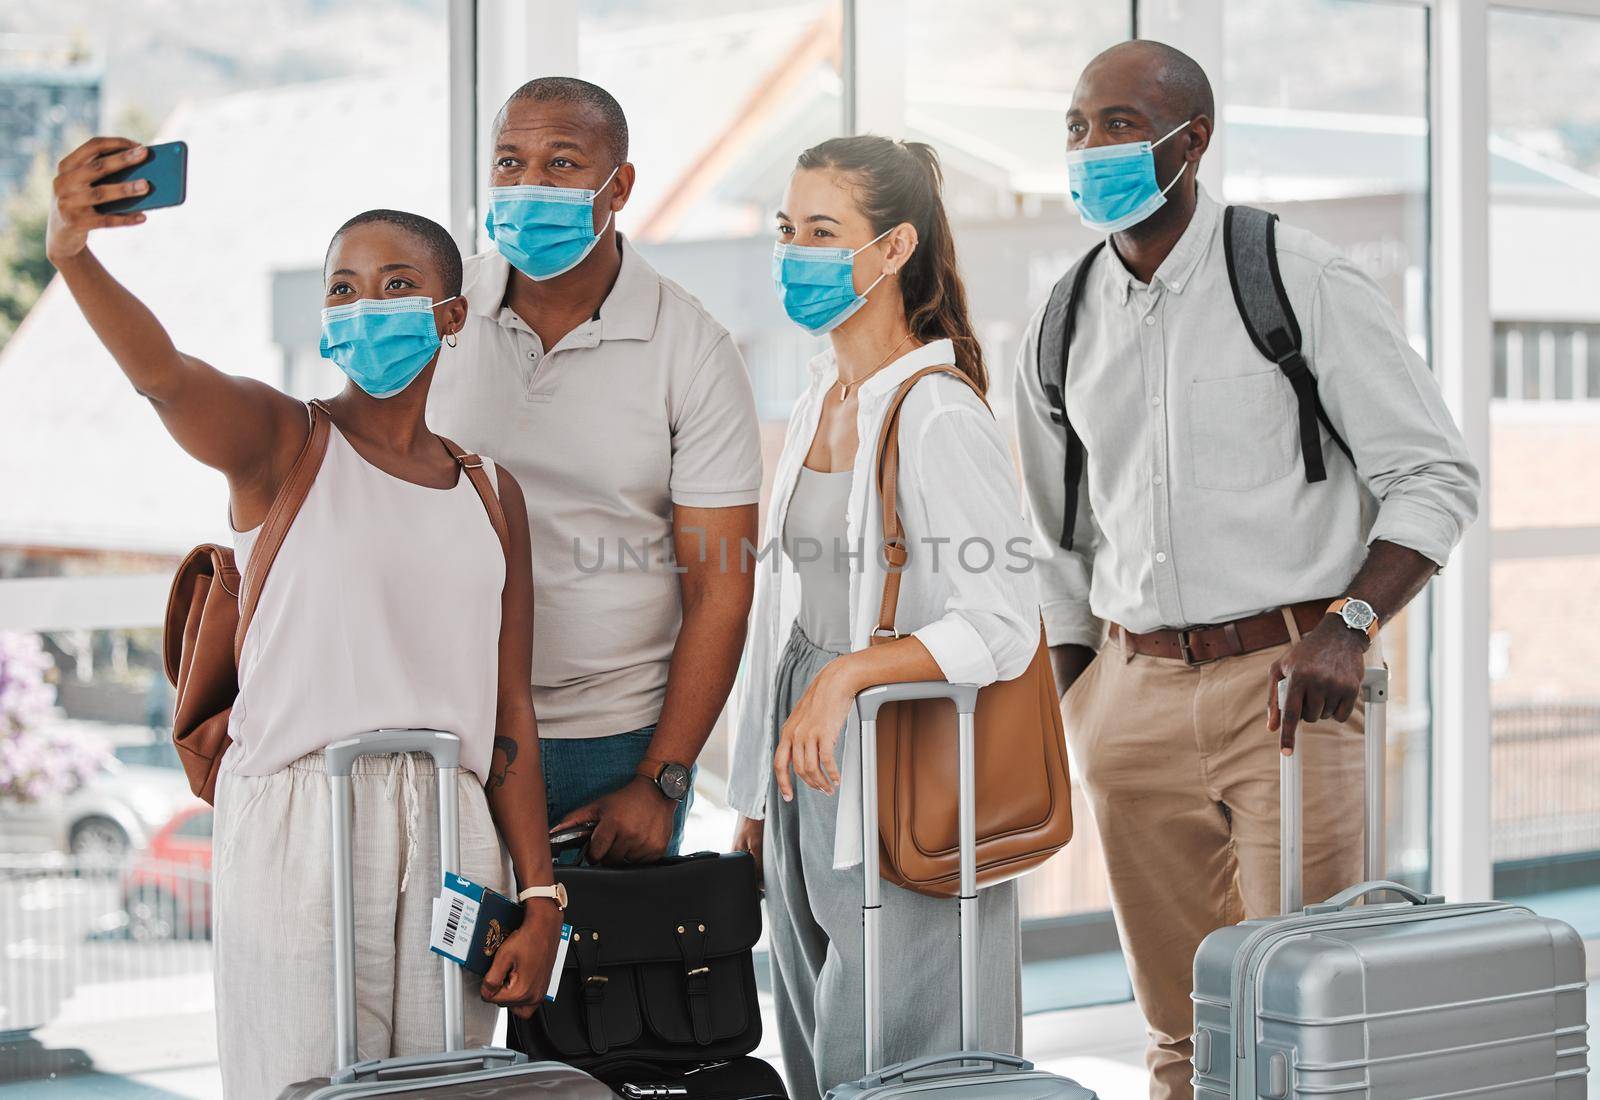 Travel people taking selfie with covid face mask at the airport on their trip, travel or holiday overseas. Group of people or friends with suitcase, phone and social media memories while on vacation.